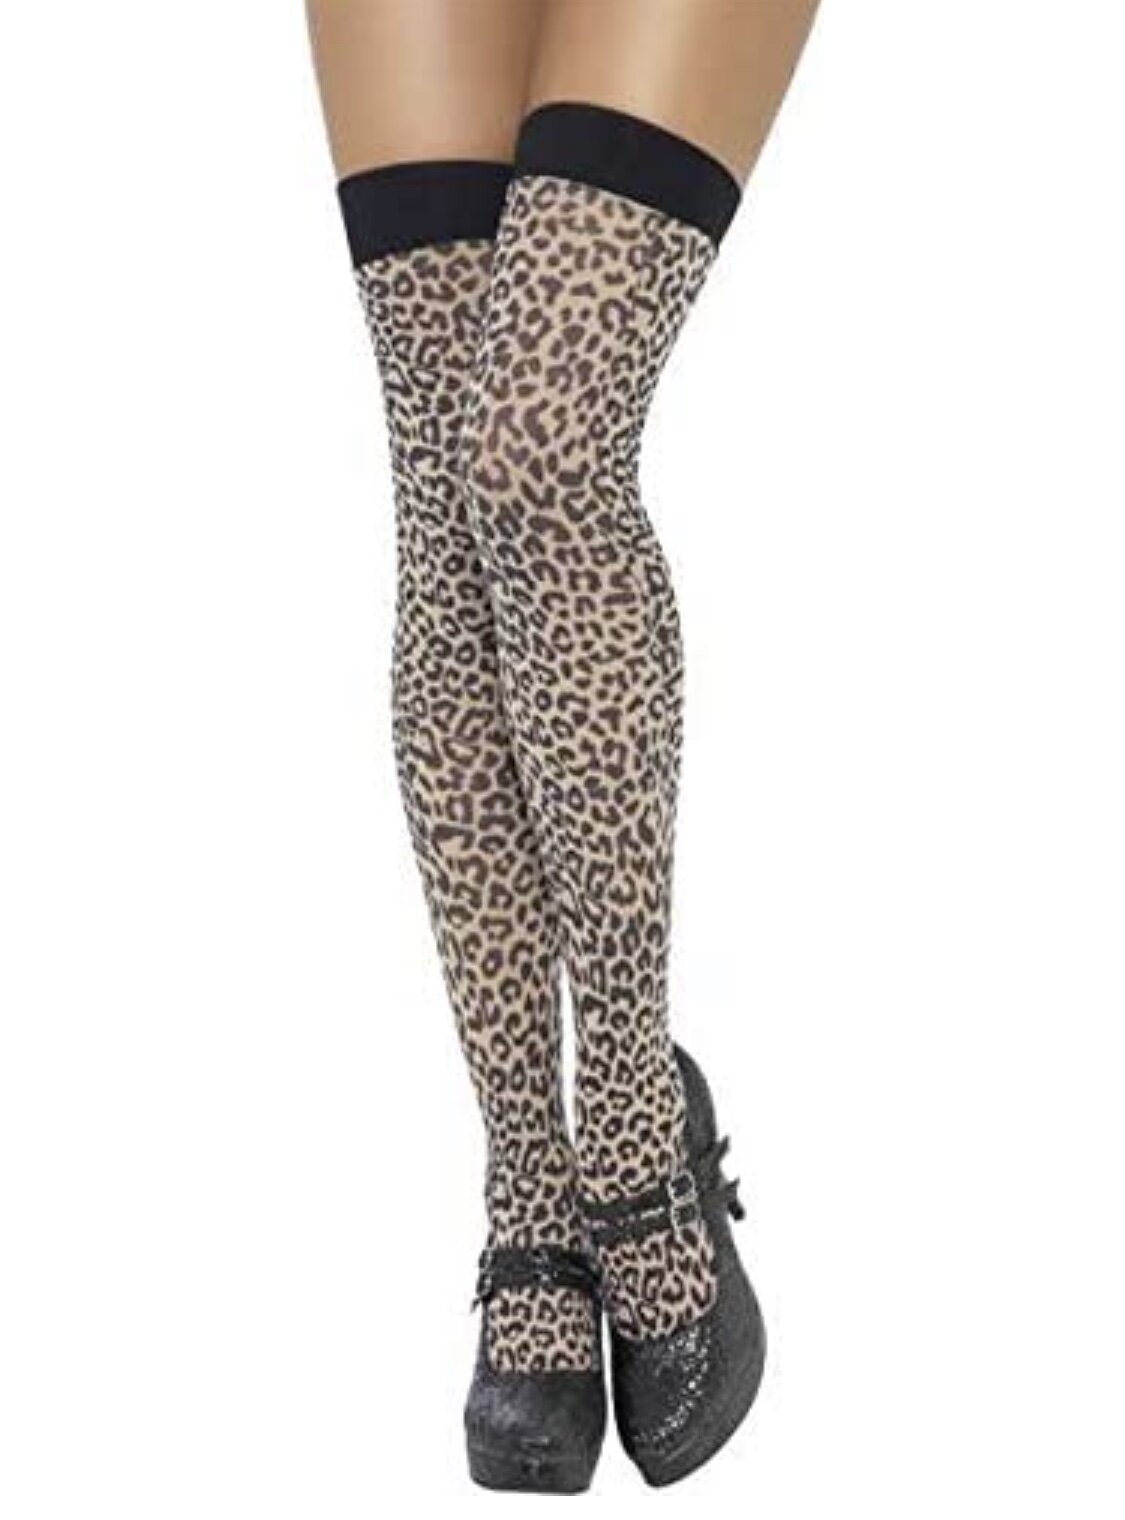 Stocking Leopard Request And Find The Sims 4 Loverslab 